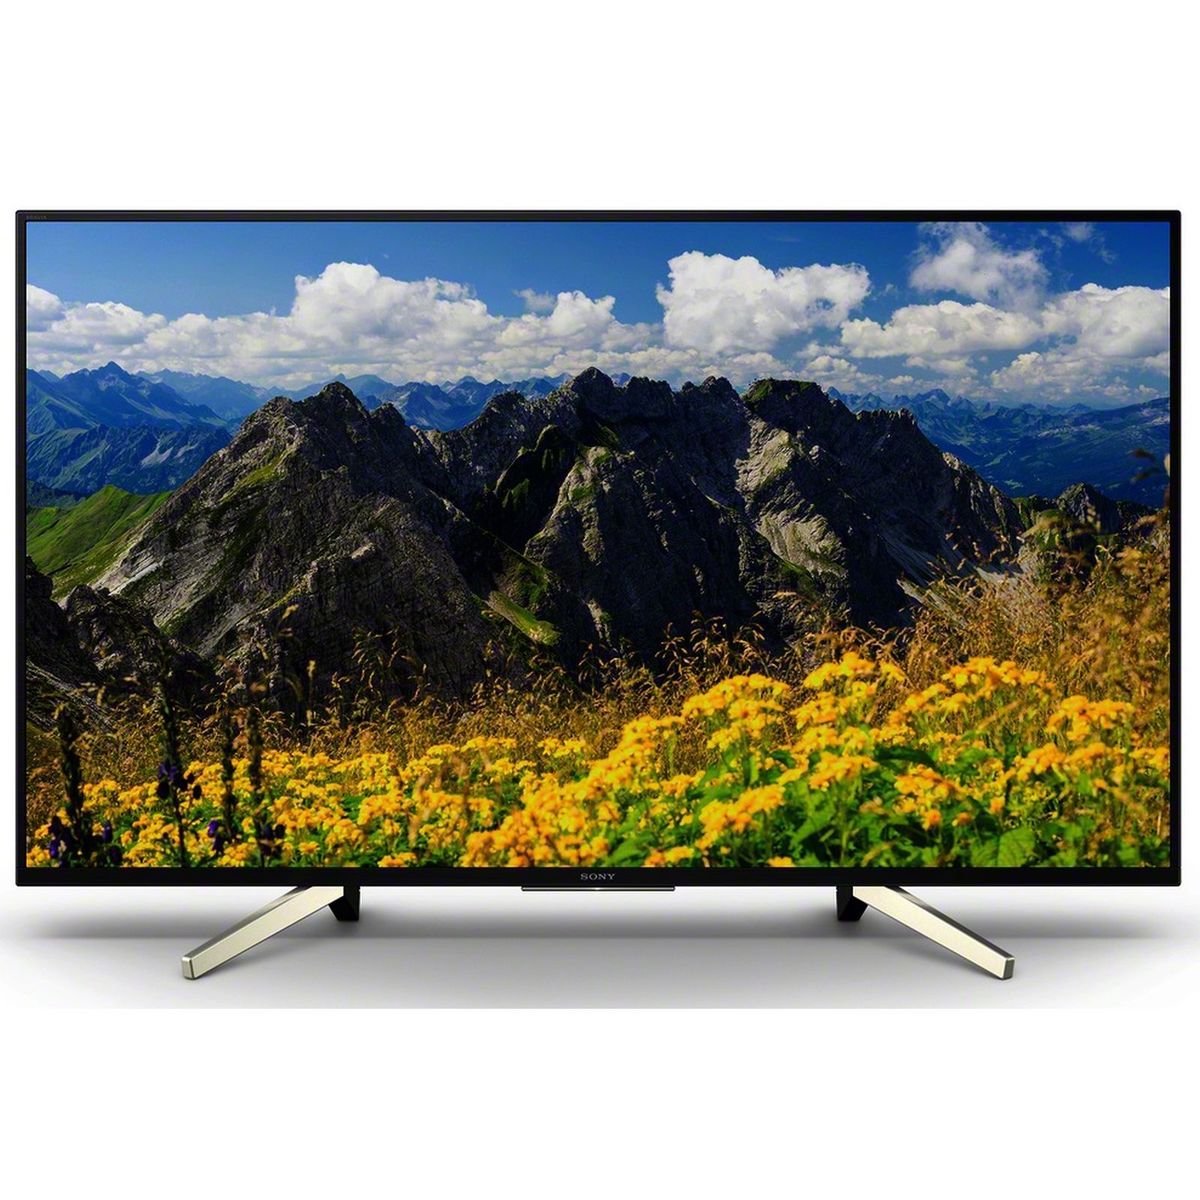 Sony 4K Ultra HD Android Smart LED TV KD-49X7500F 49inch